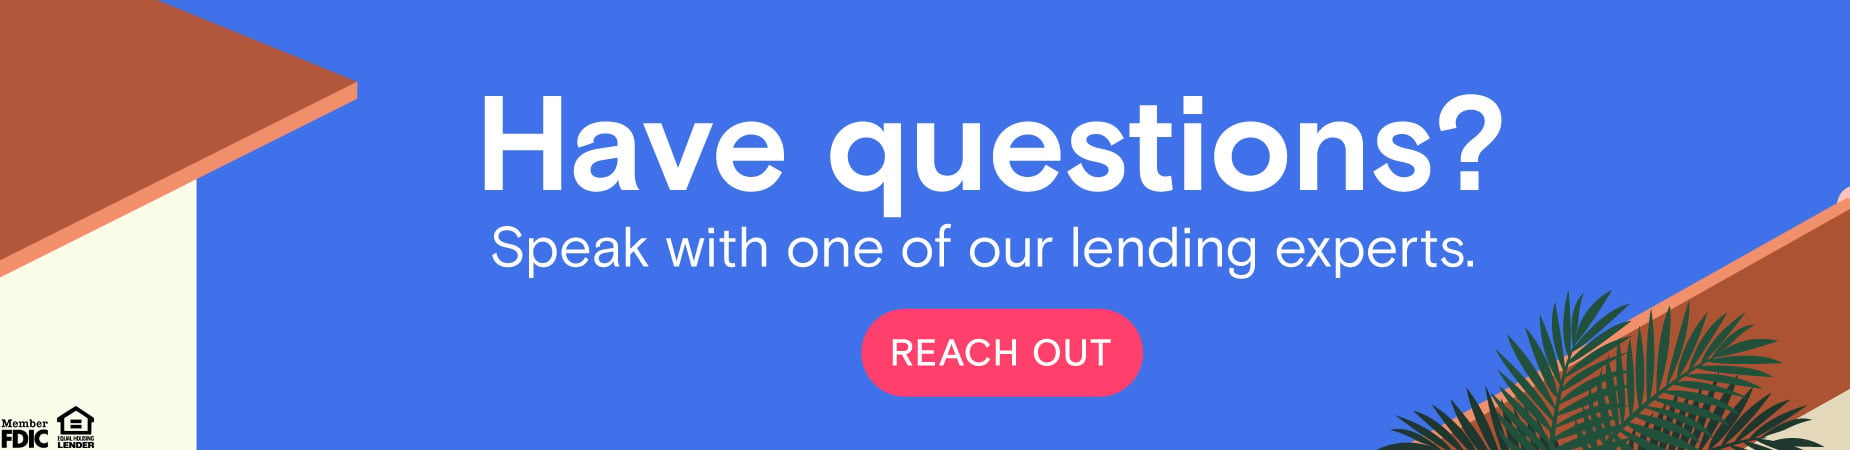 Have questions? Speak with one of our lending experts.